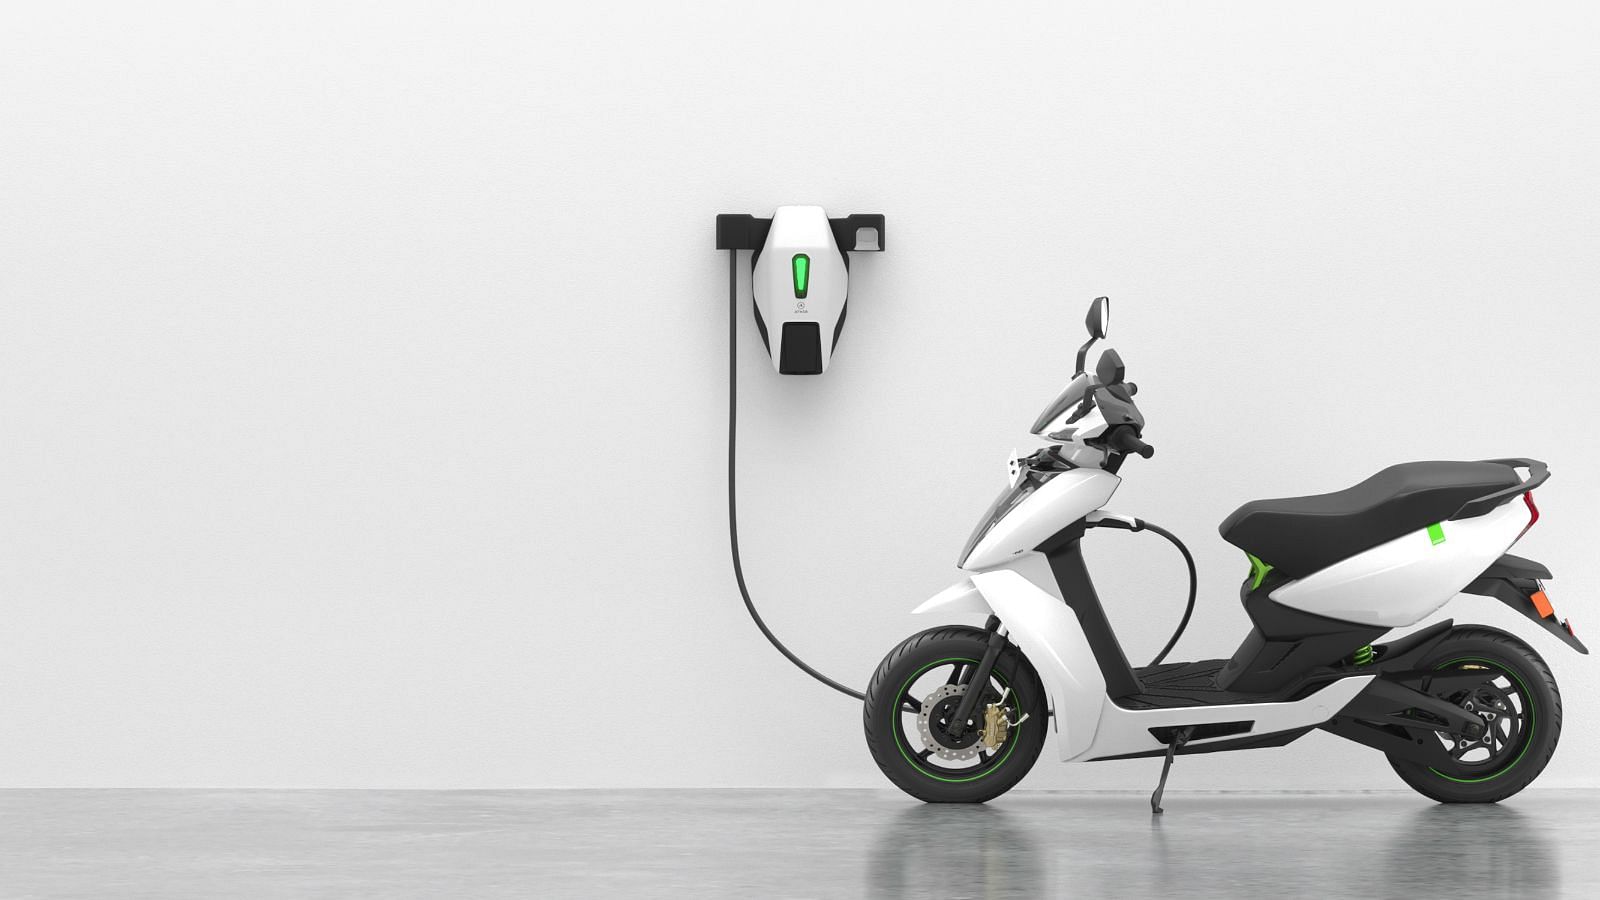 Ather electric vehicle